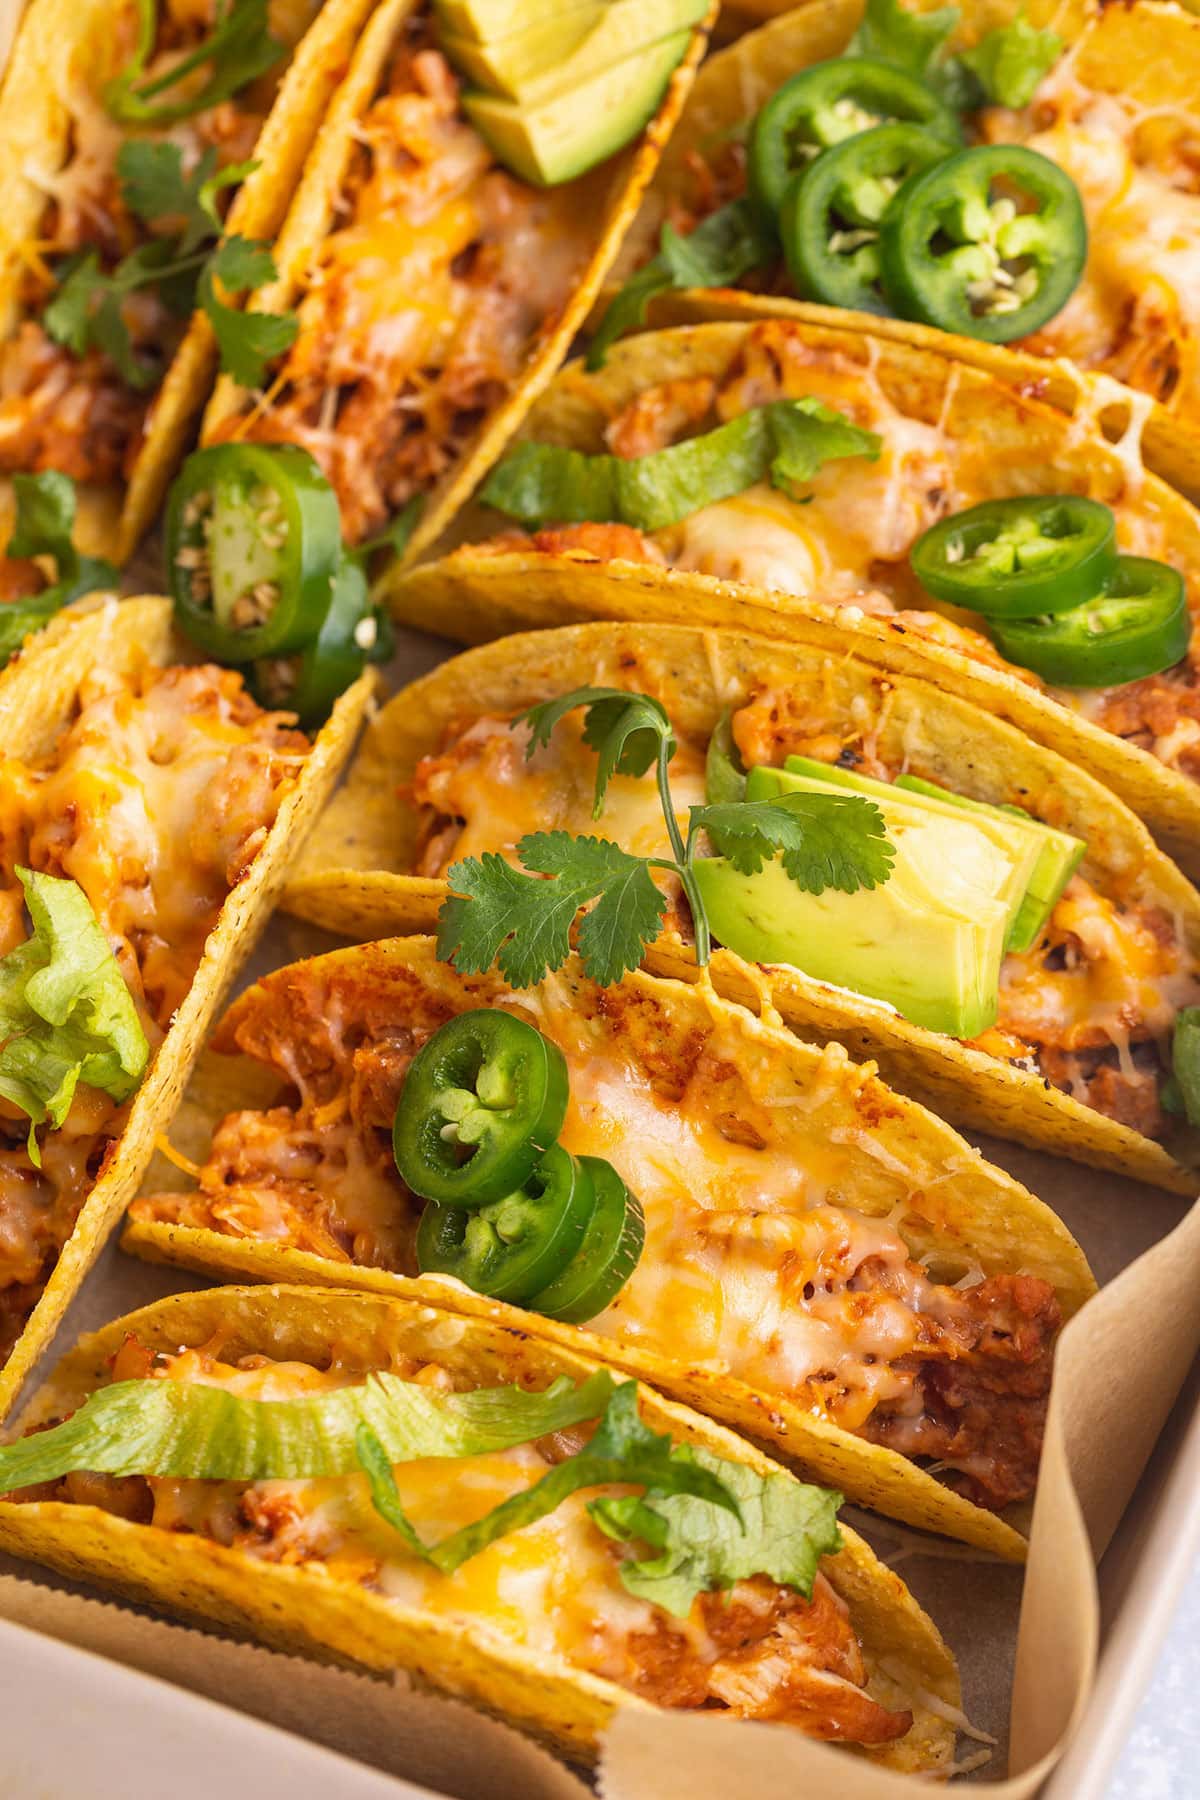 Baked chicken tacos in crunchy taco shells, lined up in a baking pan.